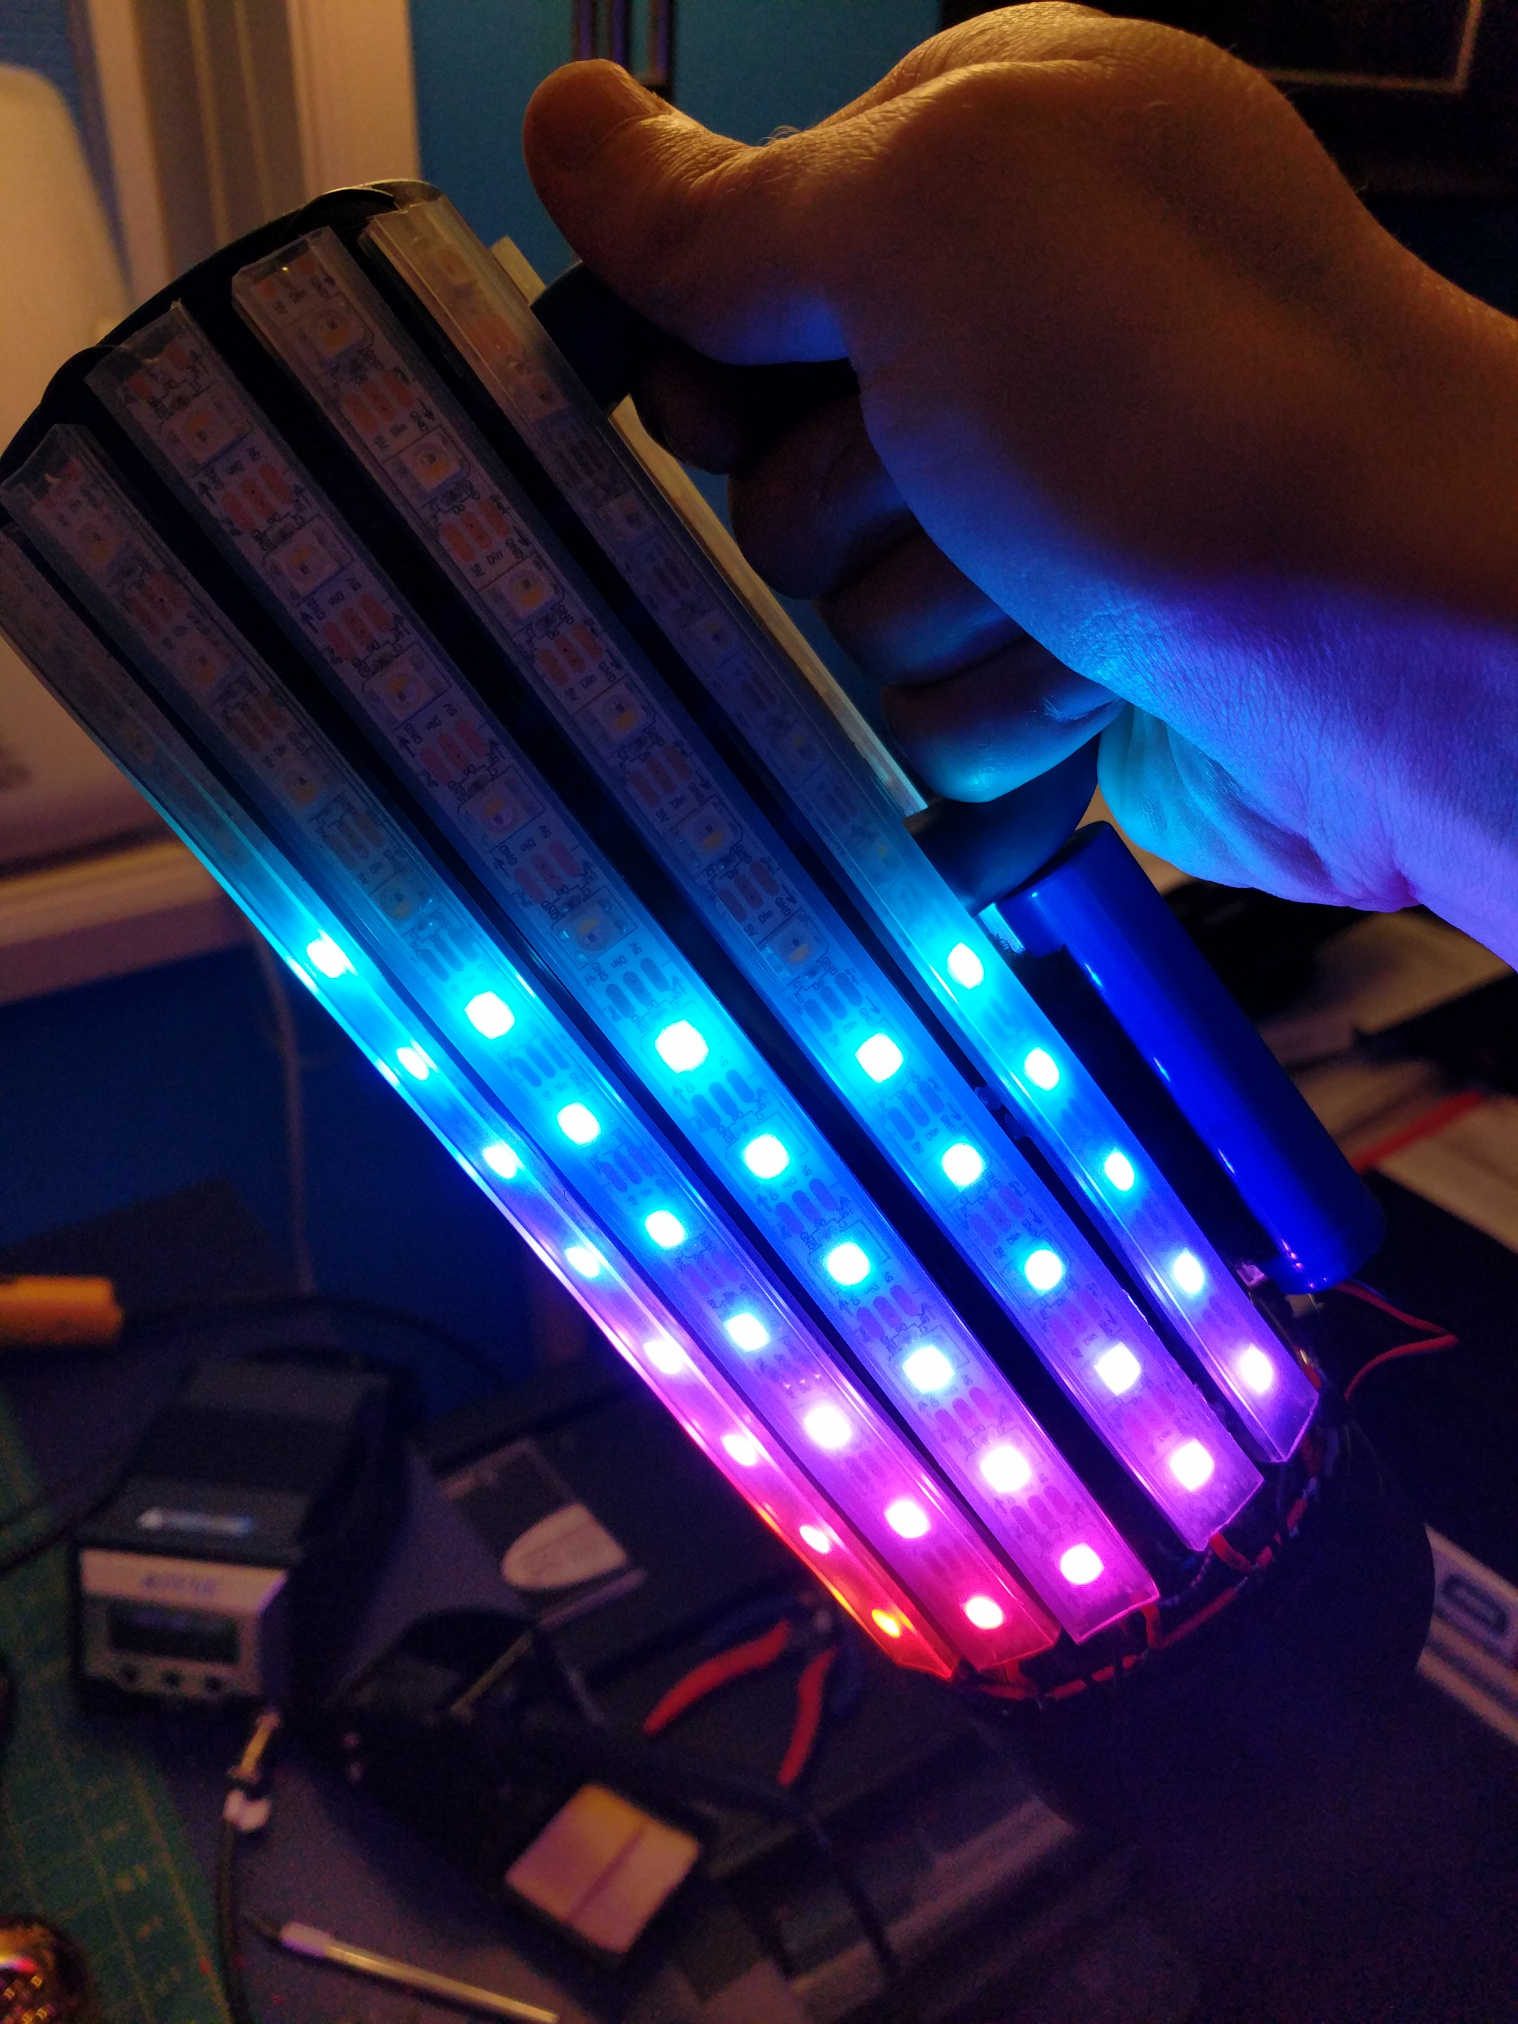 The water bottle, held at an agle, with LEDs slit in a rainbow representing virtual fluid